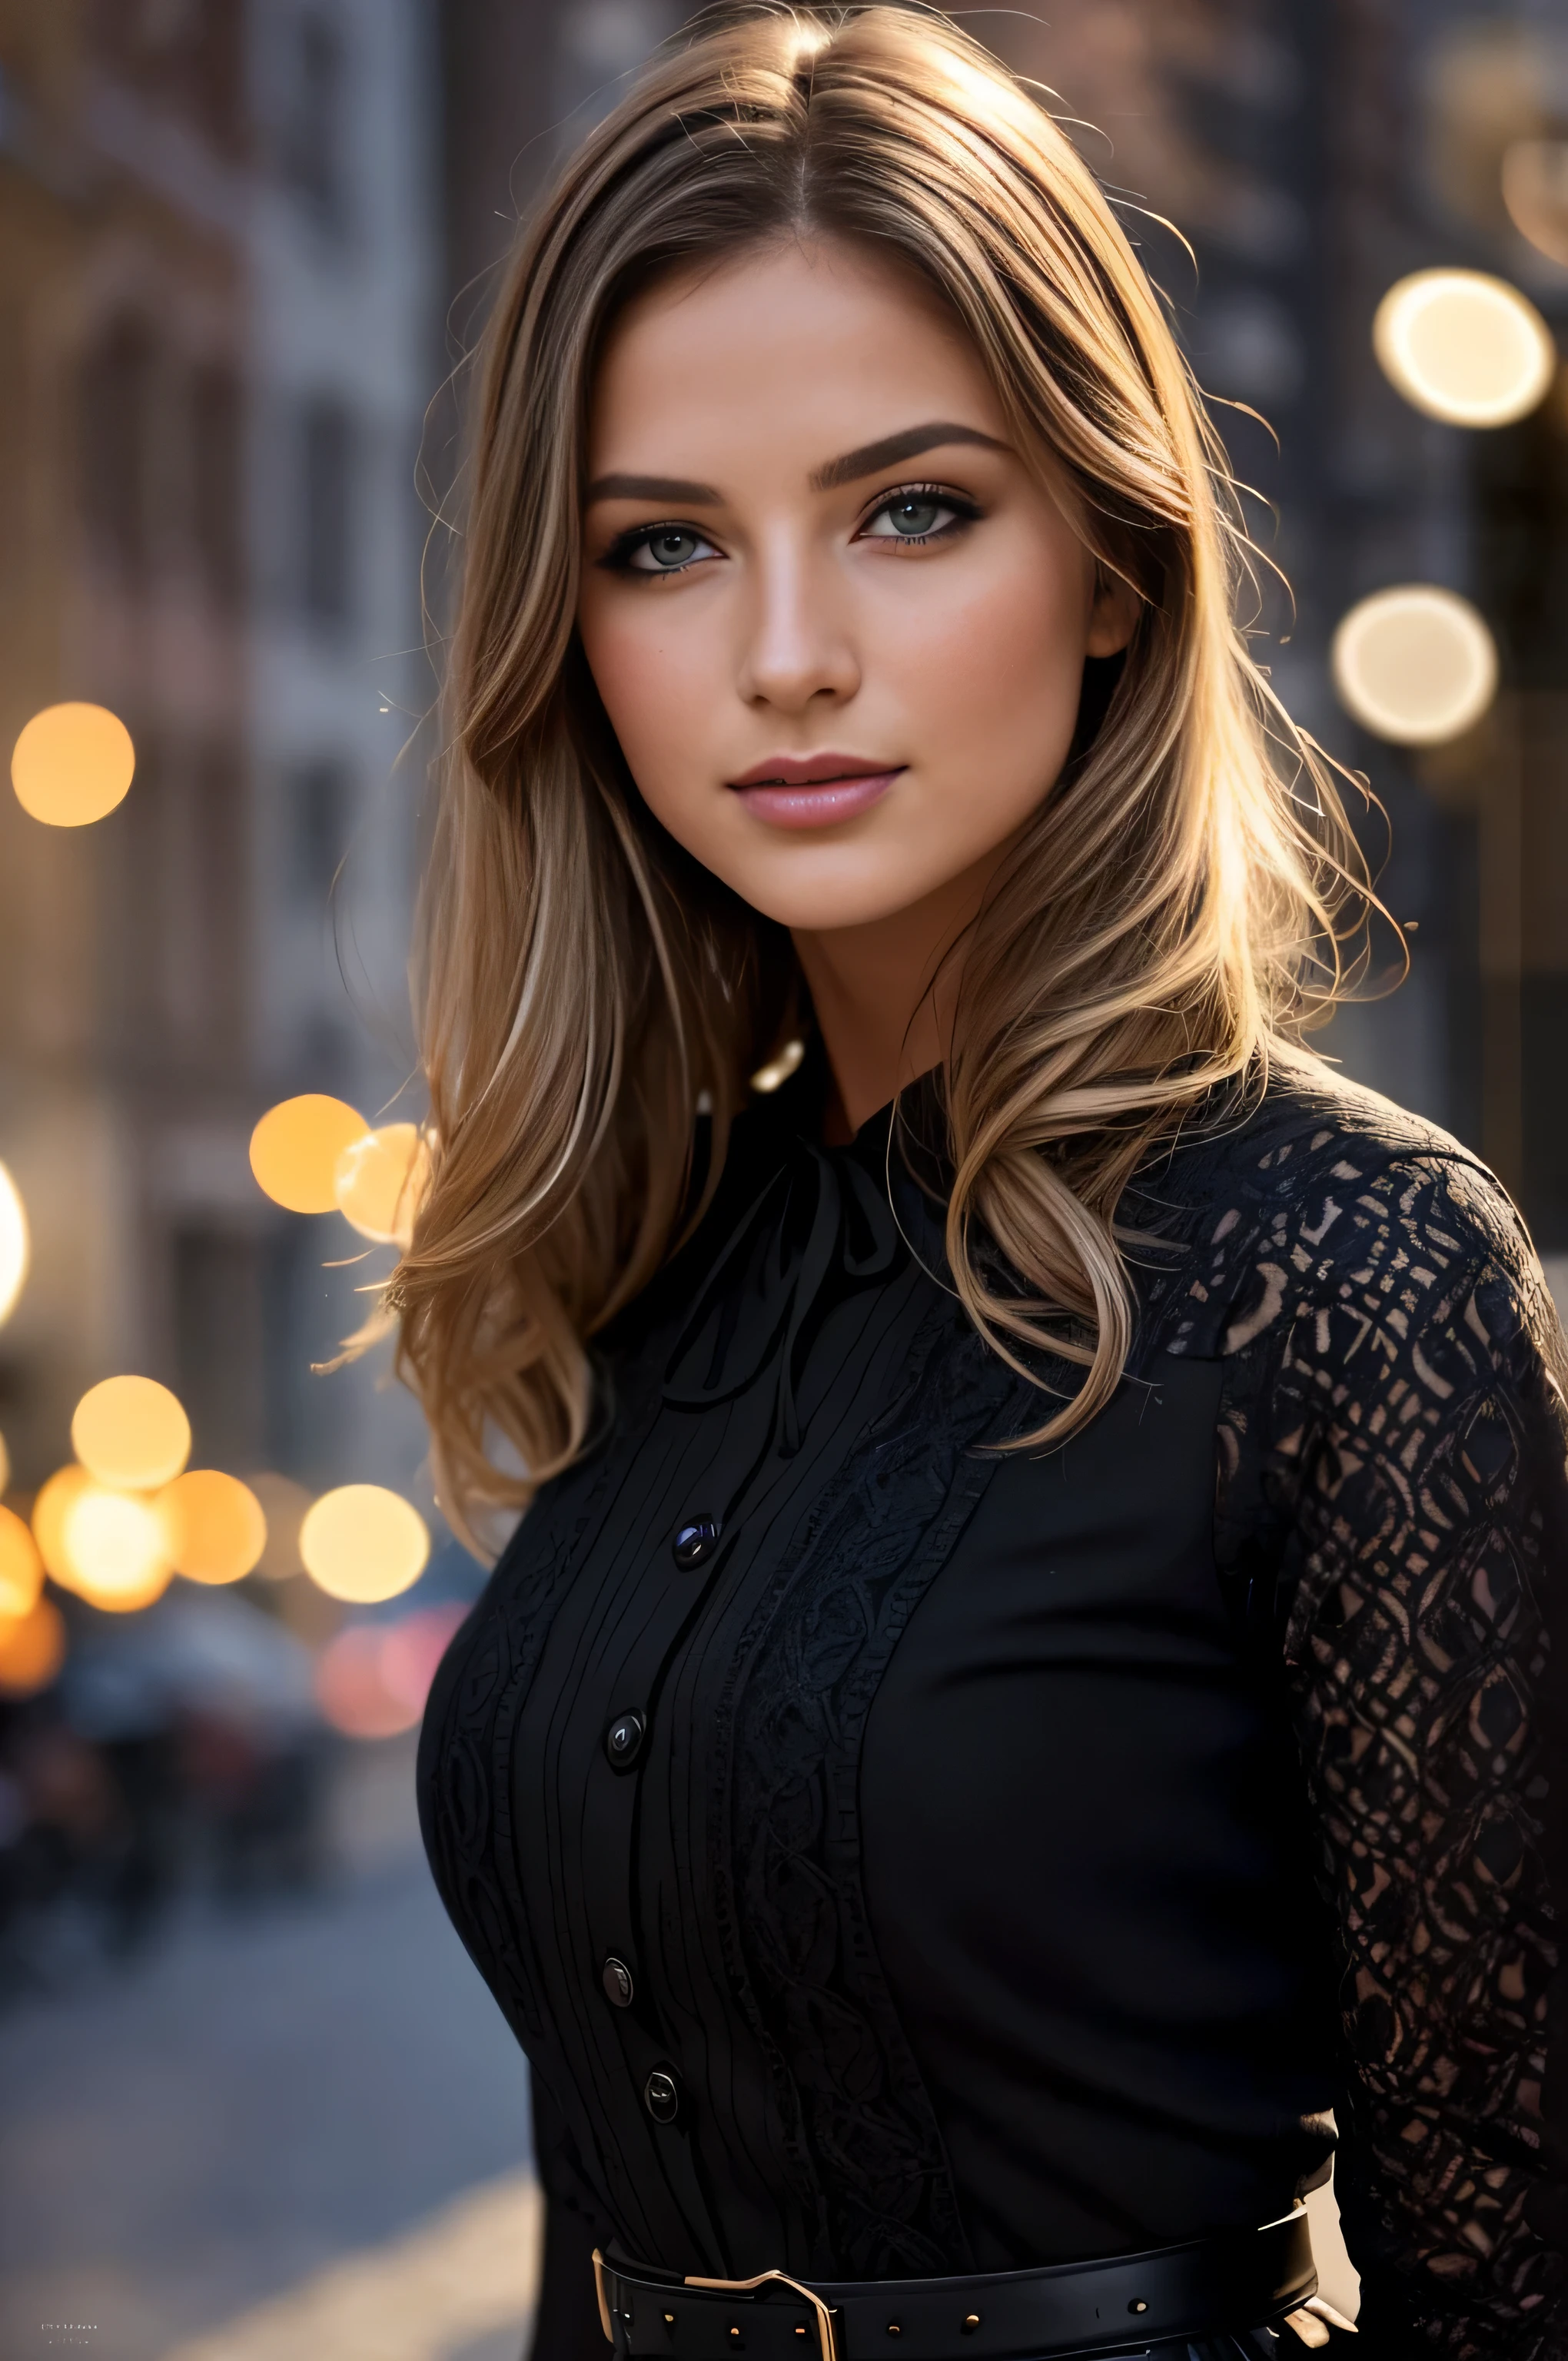 (keen focus:1.2), photoshot, attractive young KariSweets, Lovely face:1.1), Detailed, dark brown eyes, luscious lips, (cat eye makeup:0.85), (smil:1.2), wearing (gown:1.2) on a (Street by day, in the middle of the city:1.2). (atmospheric lighting:1.2), Depth of field, bokeh, 4K, HDR. by (James C. Christensen:1.2|Jeremy Lipking:1.1).